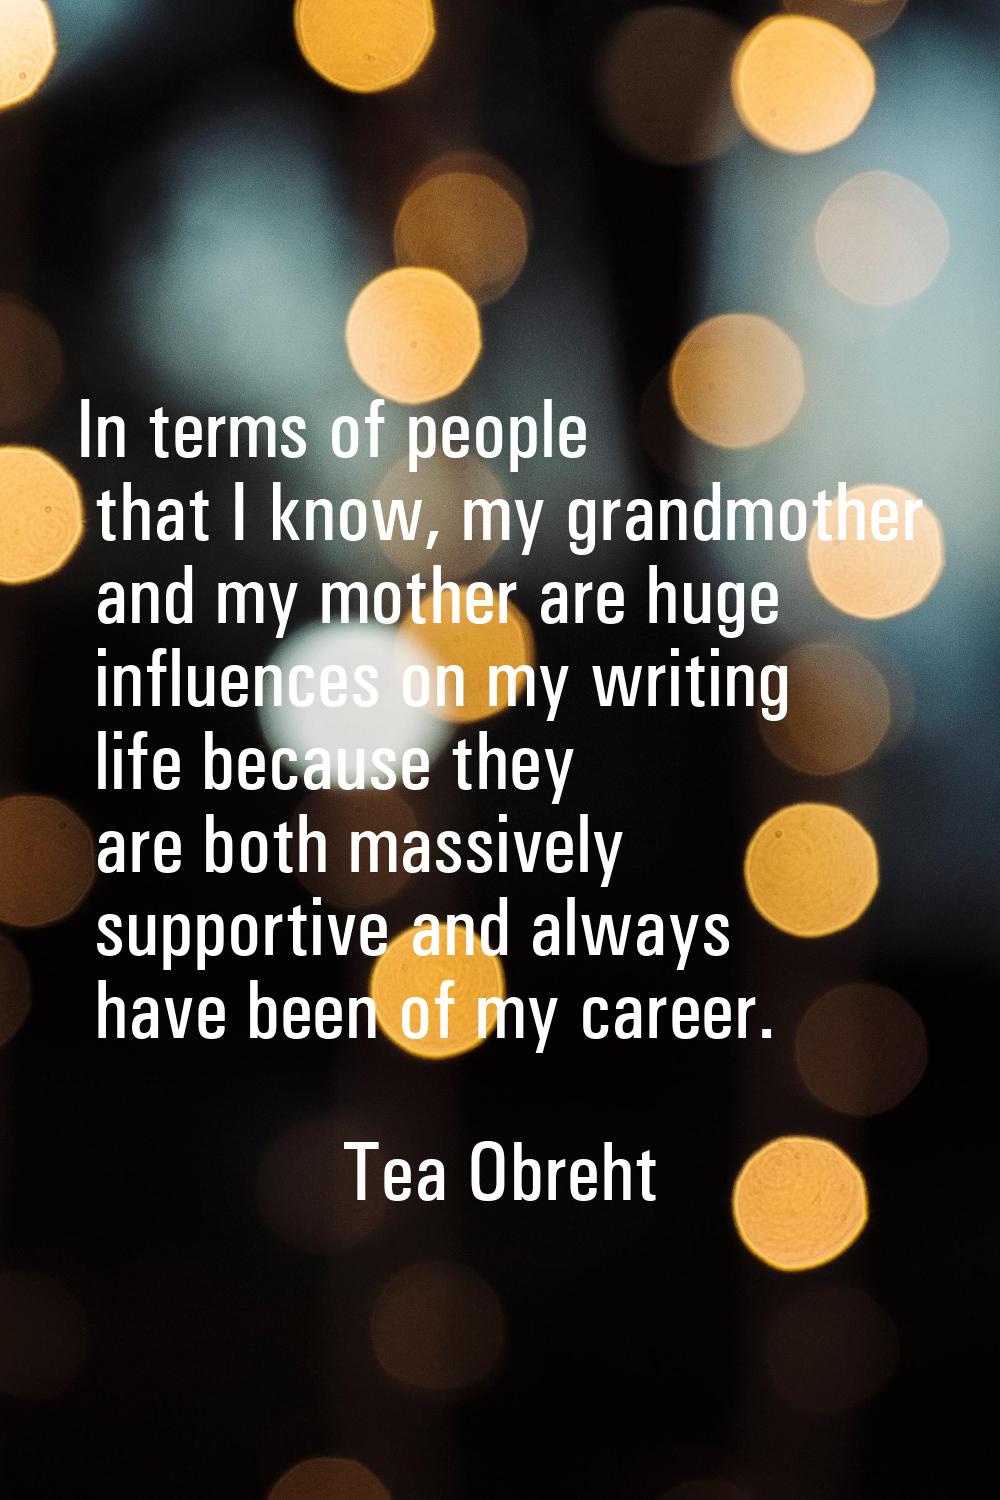 In terms of people that I know, my grandmother and my mother are huge influences on my writing life